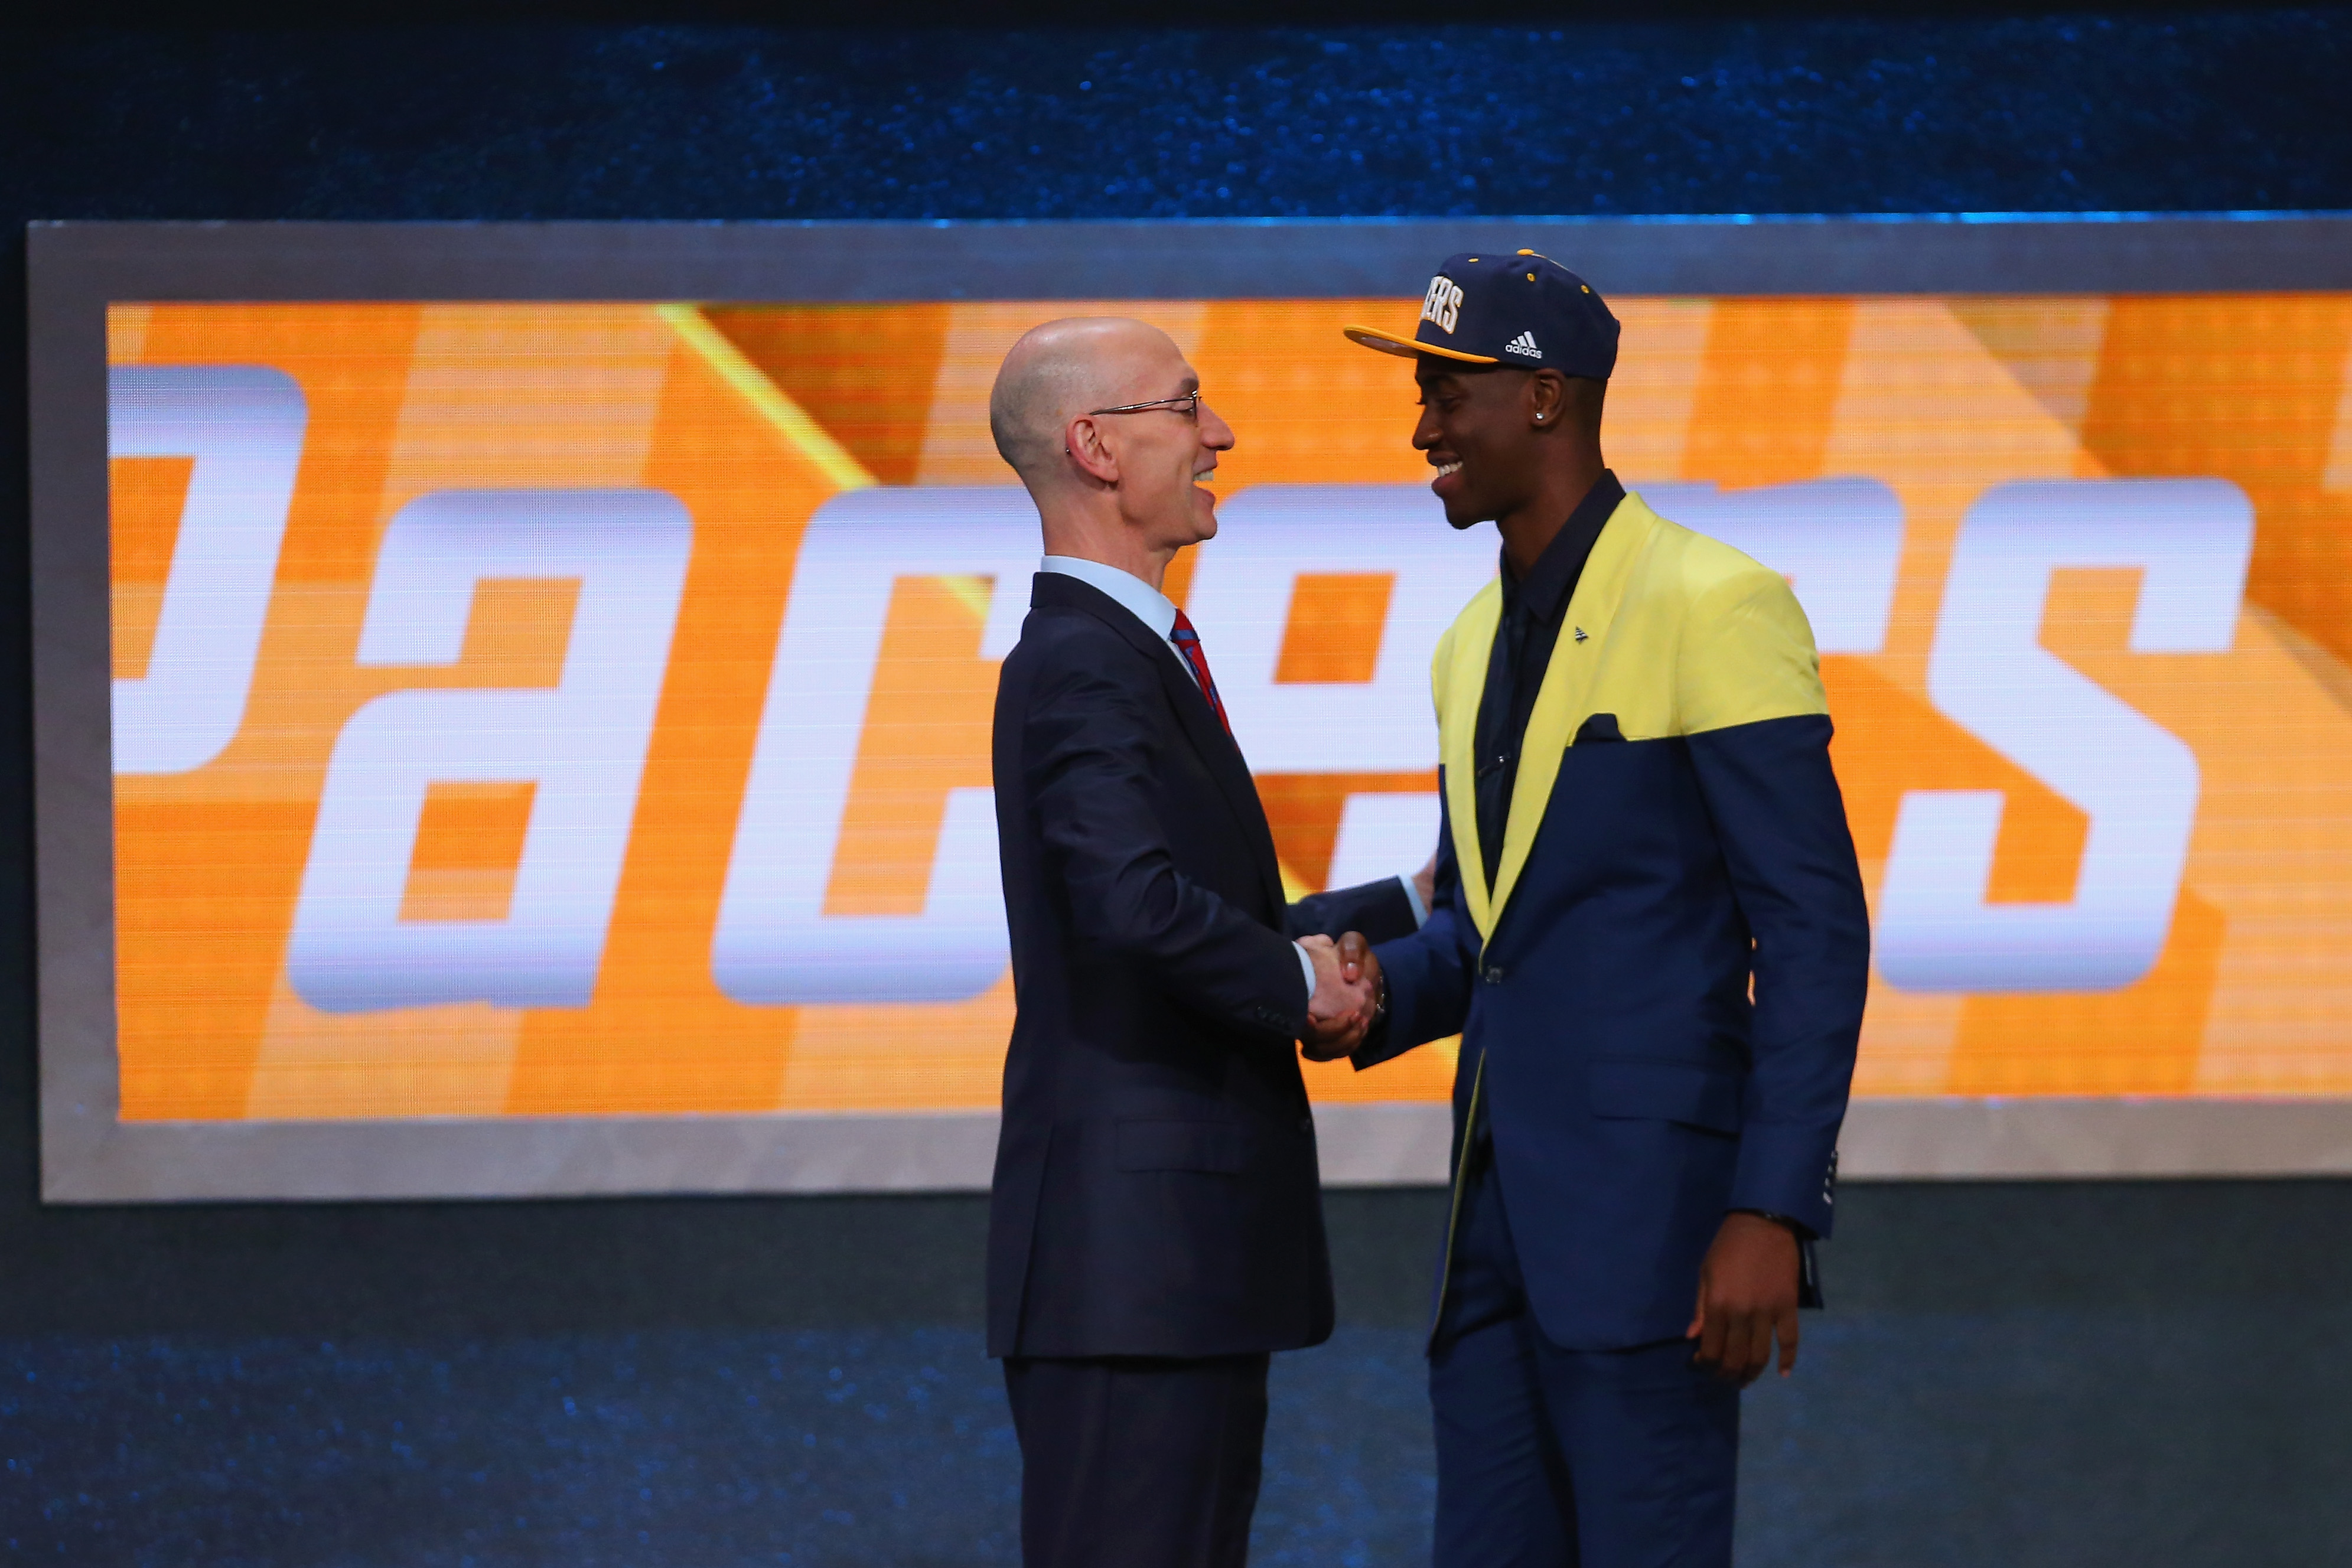 Who Did the Pacers Pick in the 2016 NBA Draft?